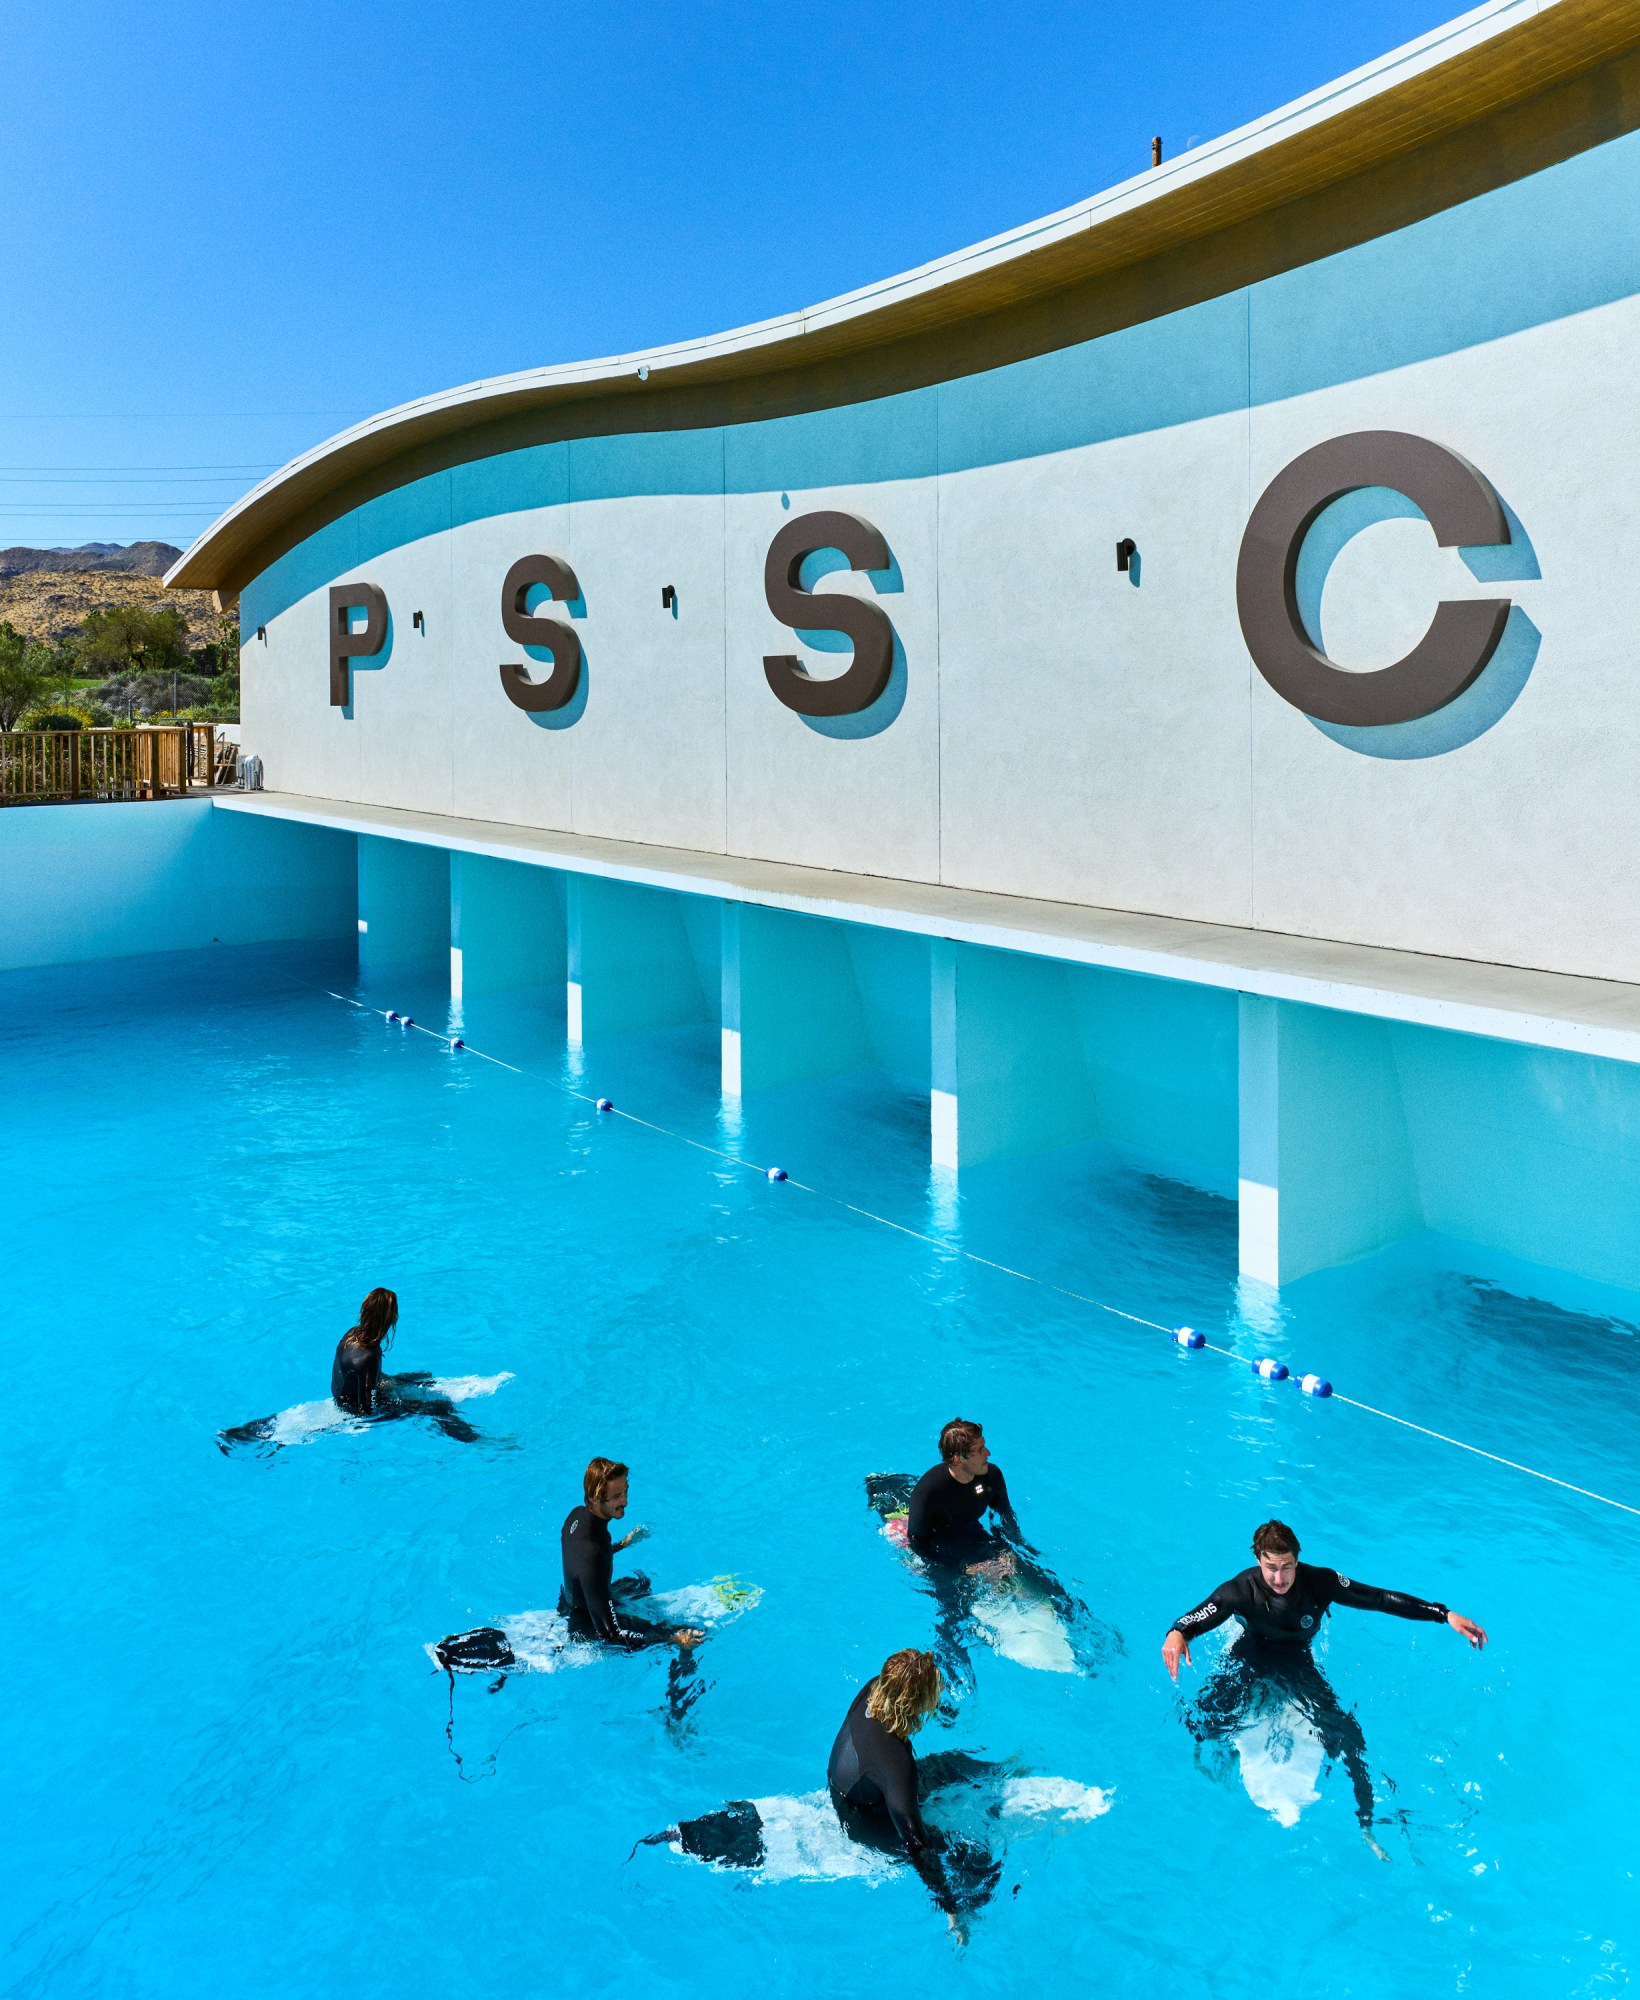 Five surfers sit on their boards in a calm PSSC pool